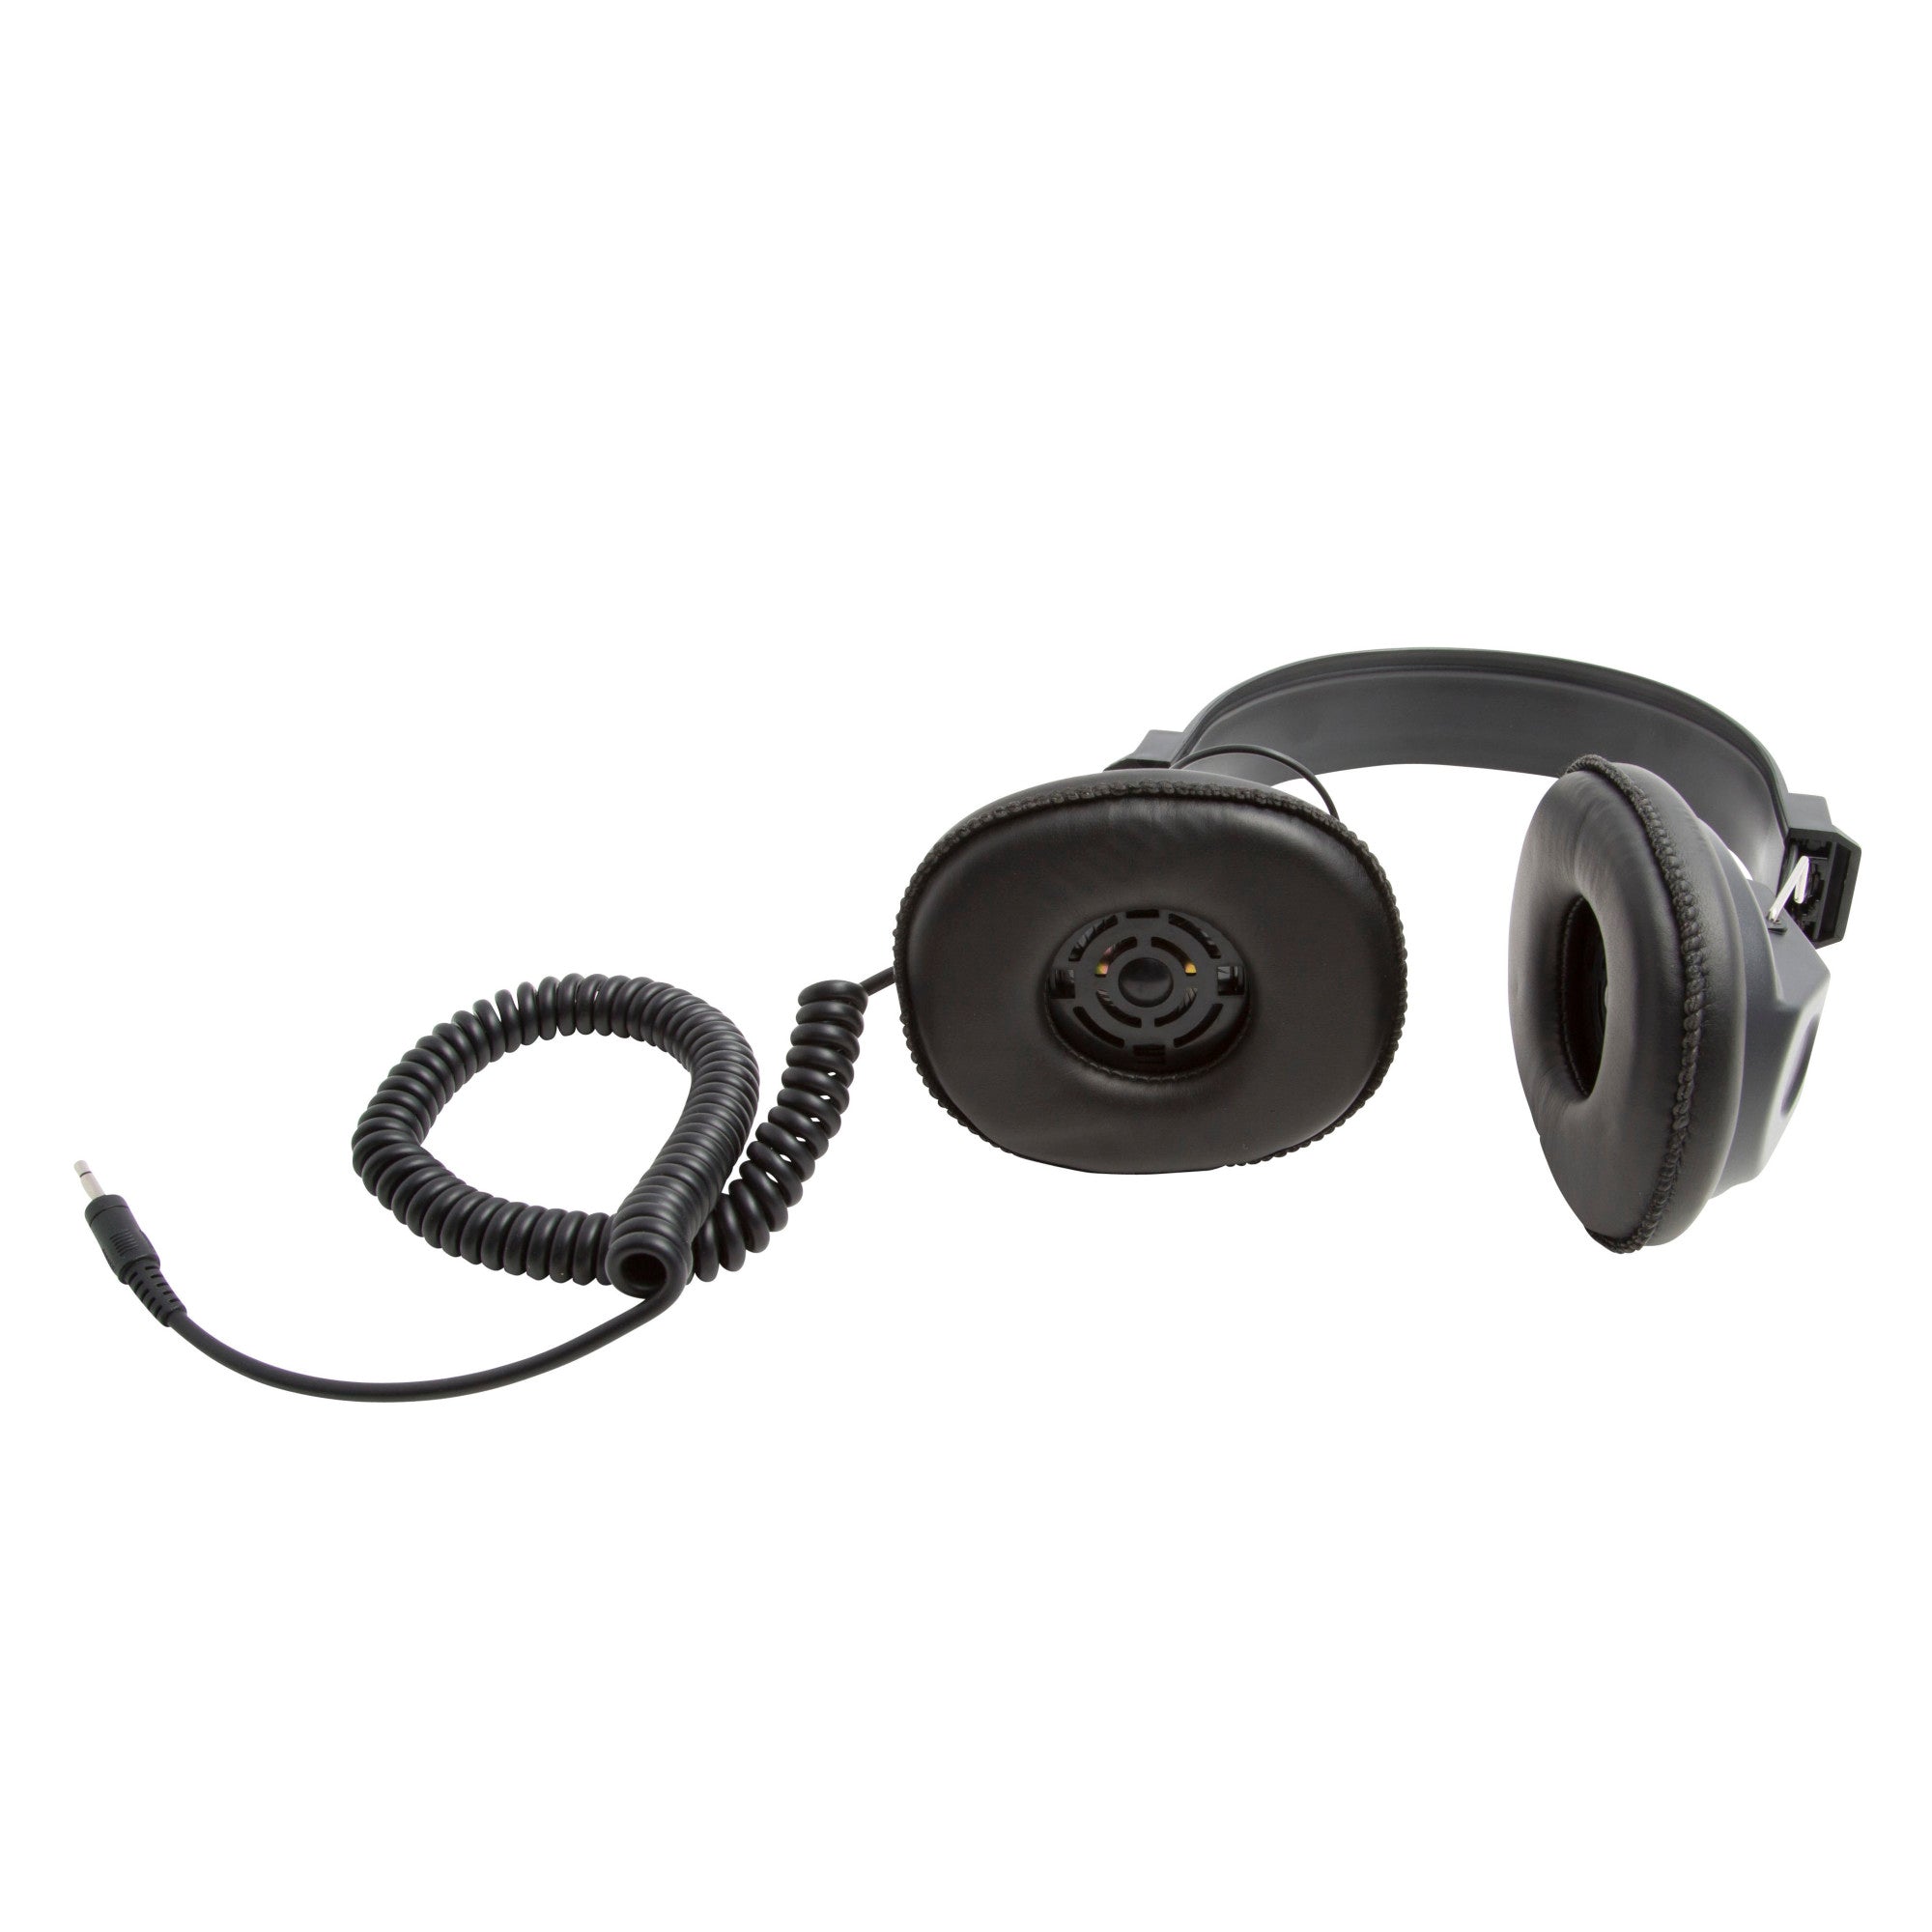 Steelman Replacement Headphones For Chassisear, Engineear I And Ii